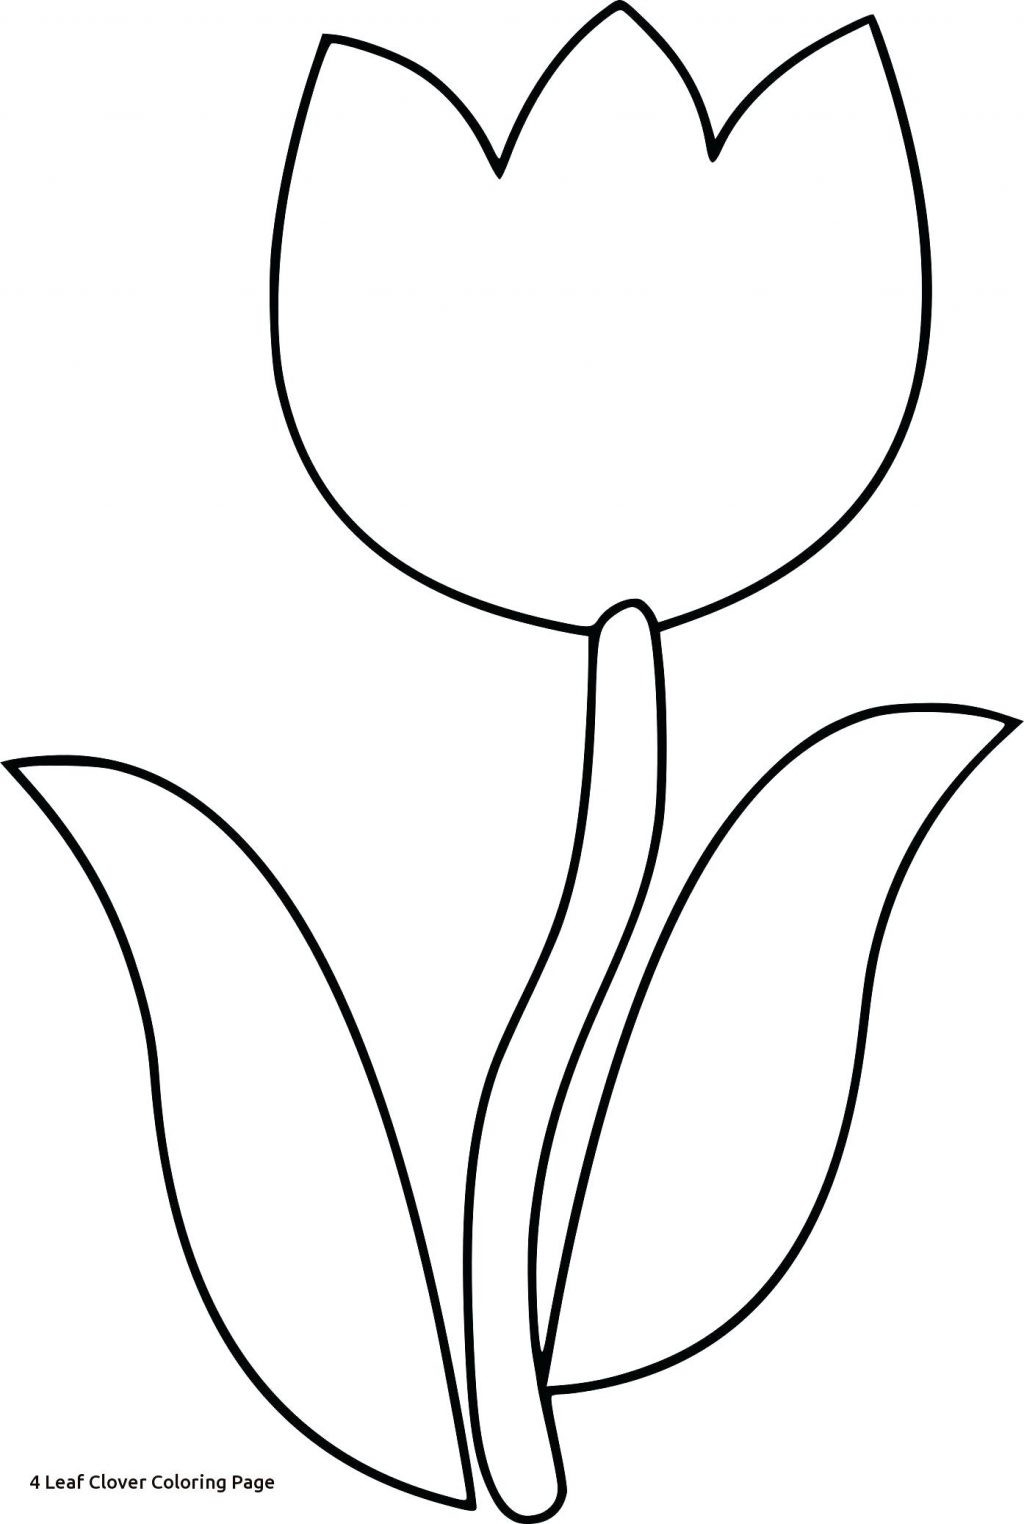 23+ Inspired Photo of Tulip Coloring Pages - birijus.com